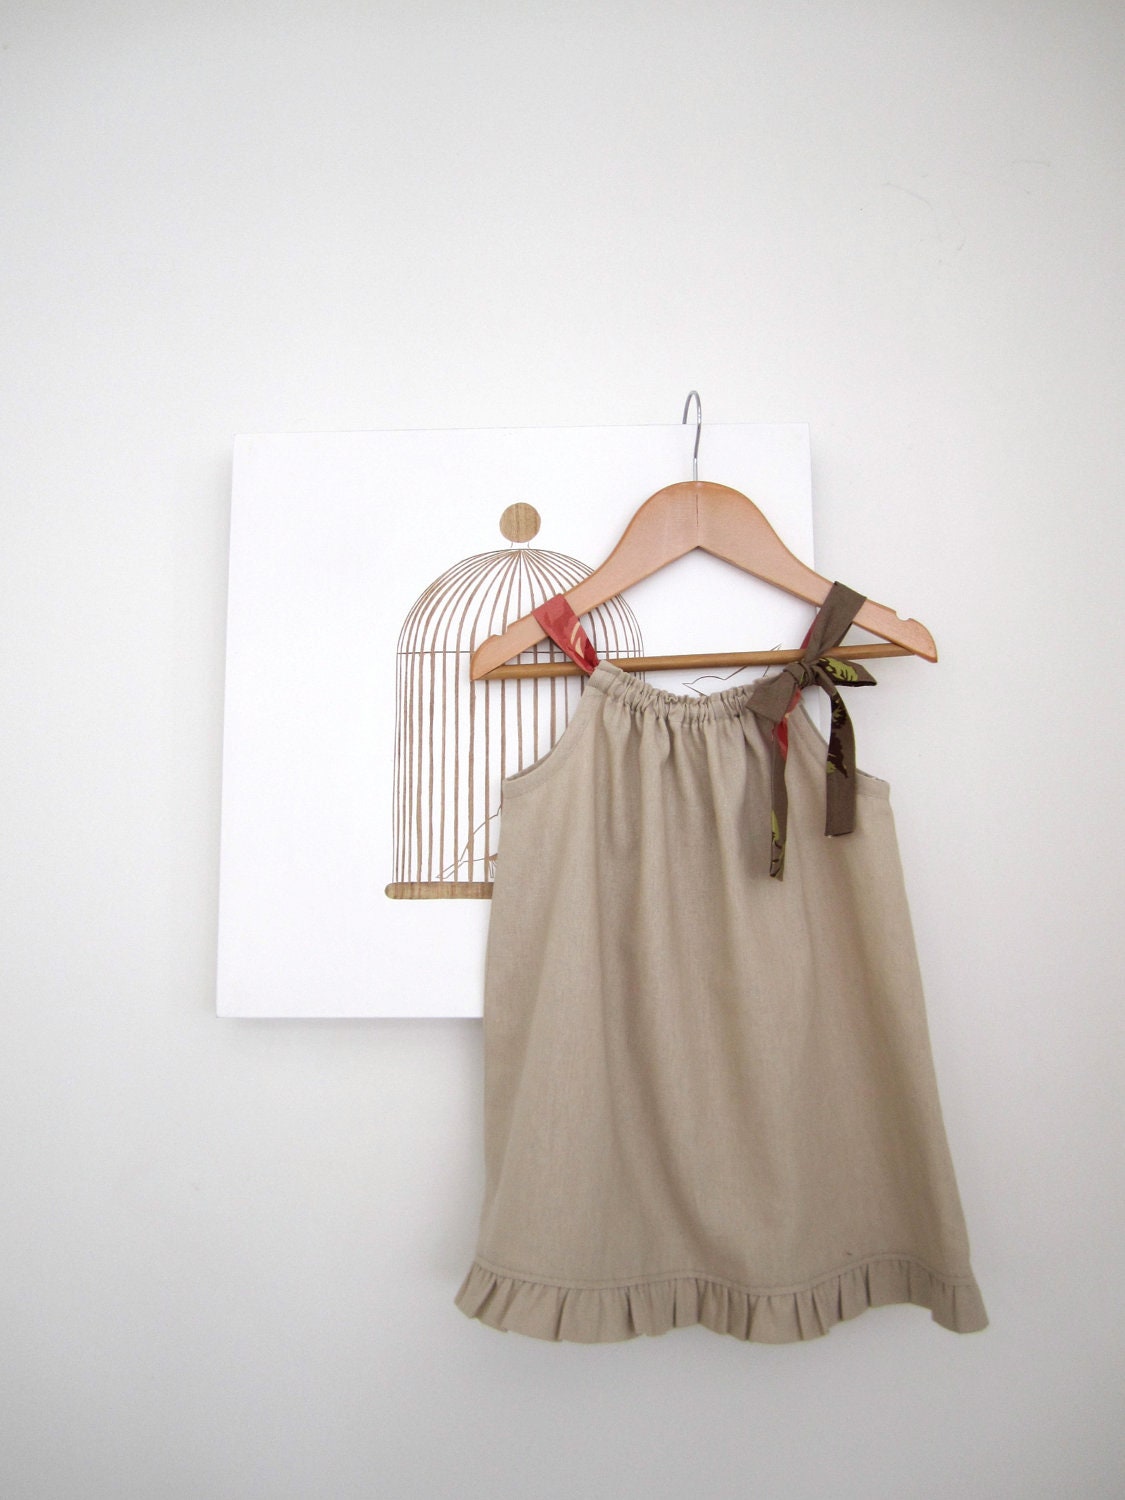 Last One 20% off..Baby Dress-Natural Latte Linen with ruffled edge and chocolate ties-toddler girls- Children Clothing by Chasing Mini - ChasingMini